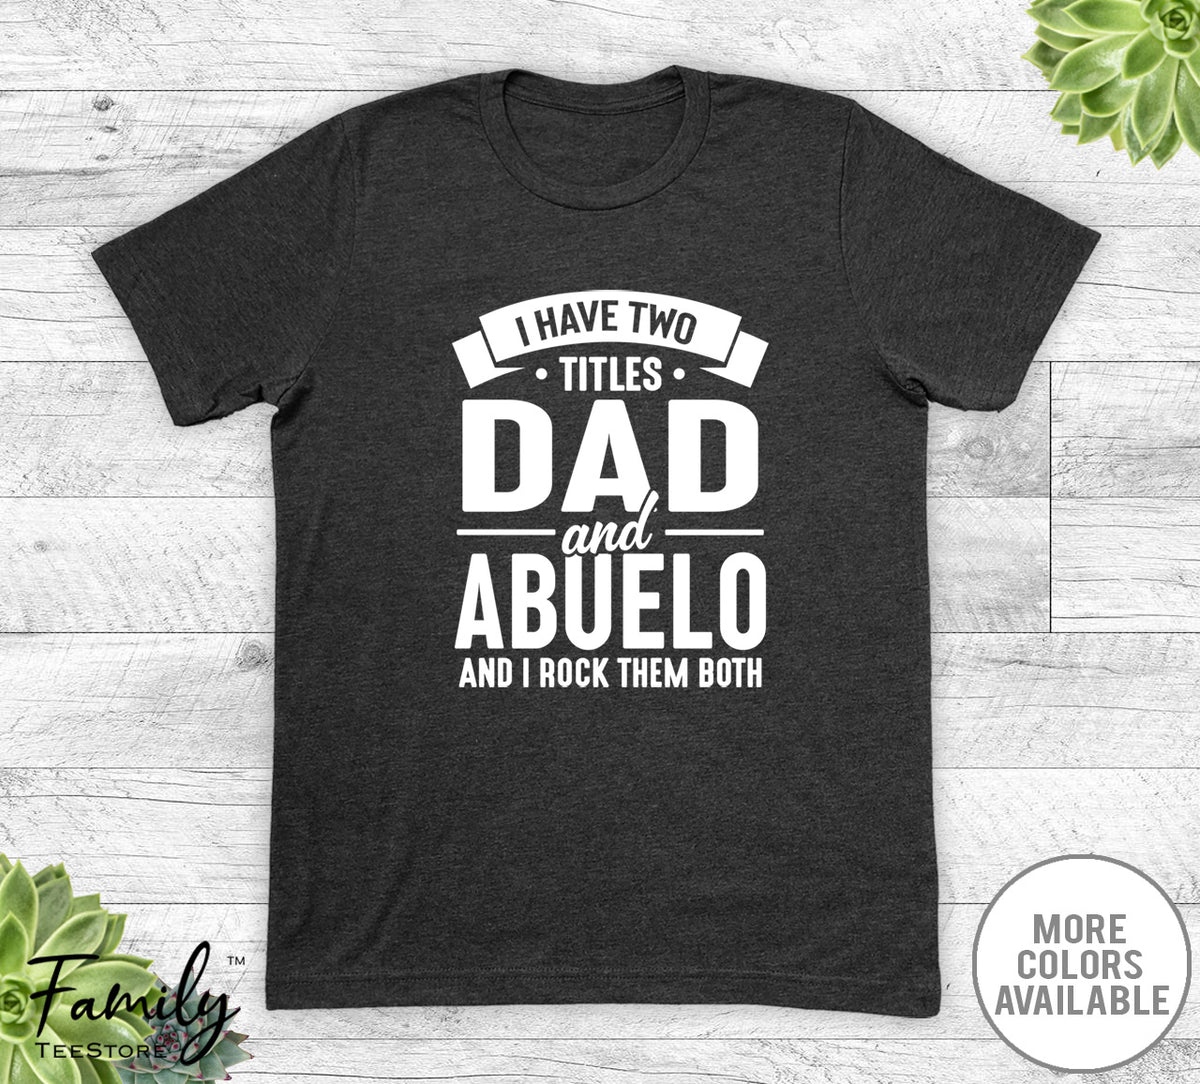 I Have Two Titles Dad And Abuelo - Unisex T-shirt - Abuelo Shirt - Funny Abuelo Gift - familyteeprints